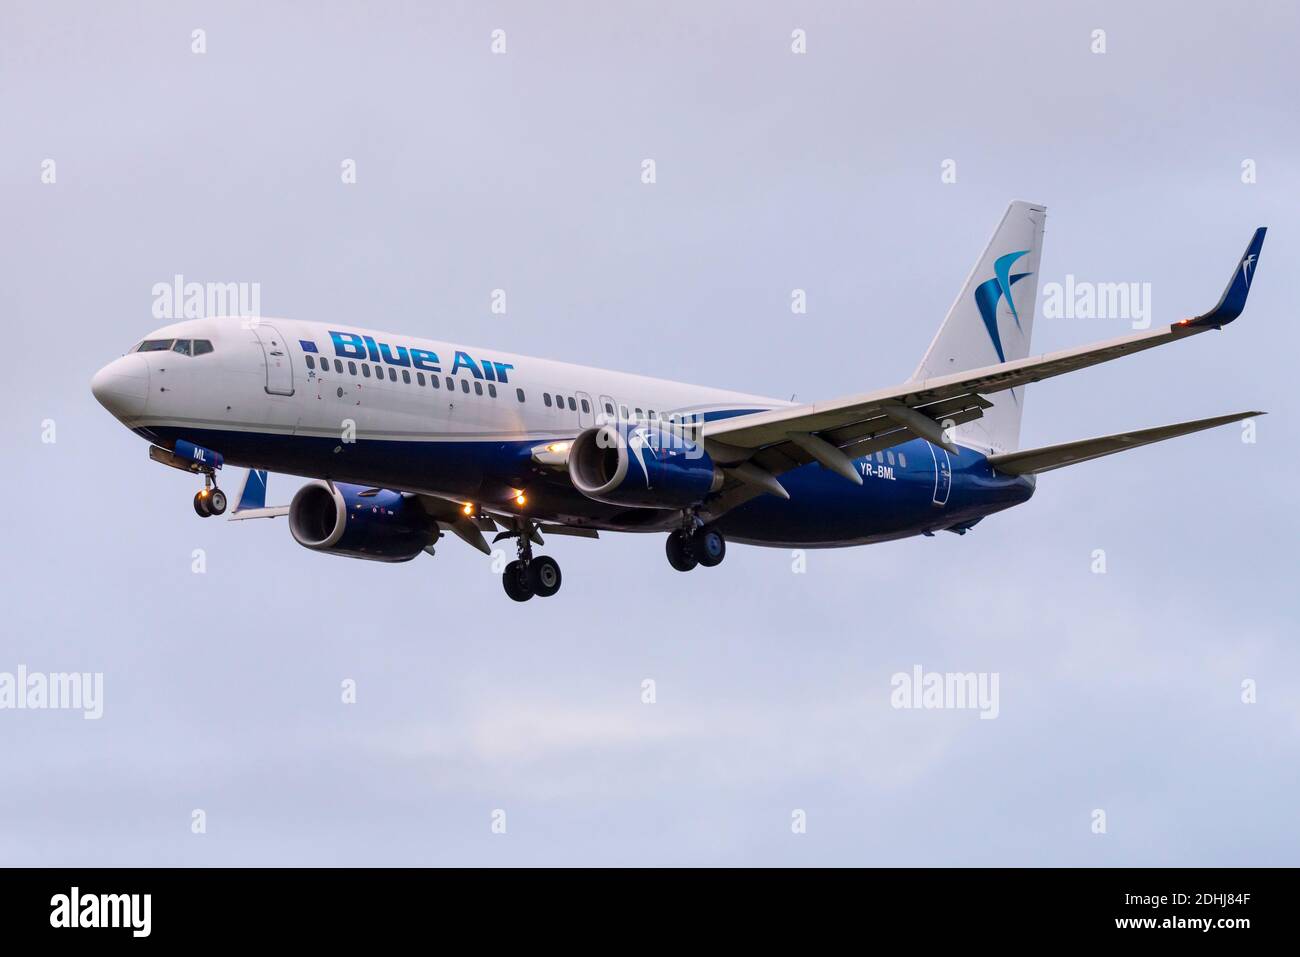 Blue Air Boeing 737 jet airliner plane YR-BML on approach to land at London Heathrow Airport, UK, during COVID 19 pandemic. Romanian low cost airline Stock Photo